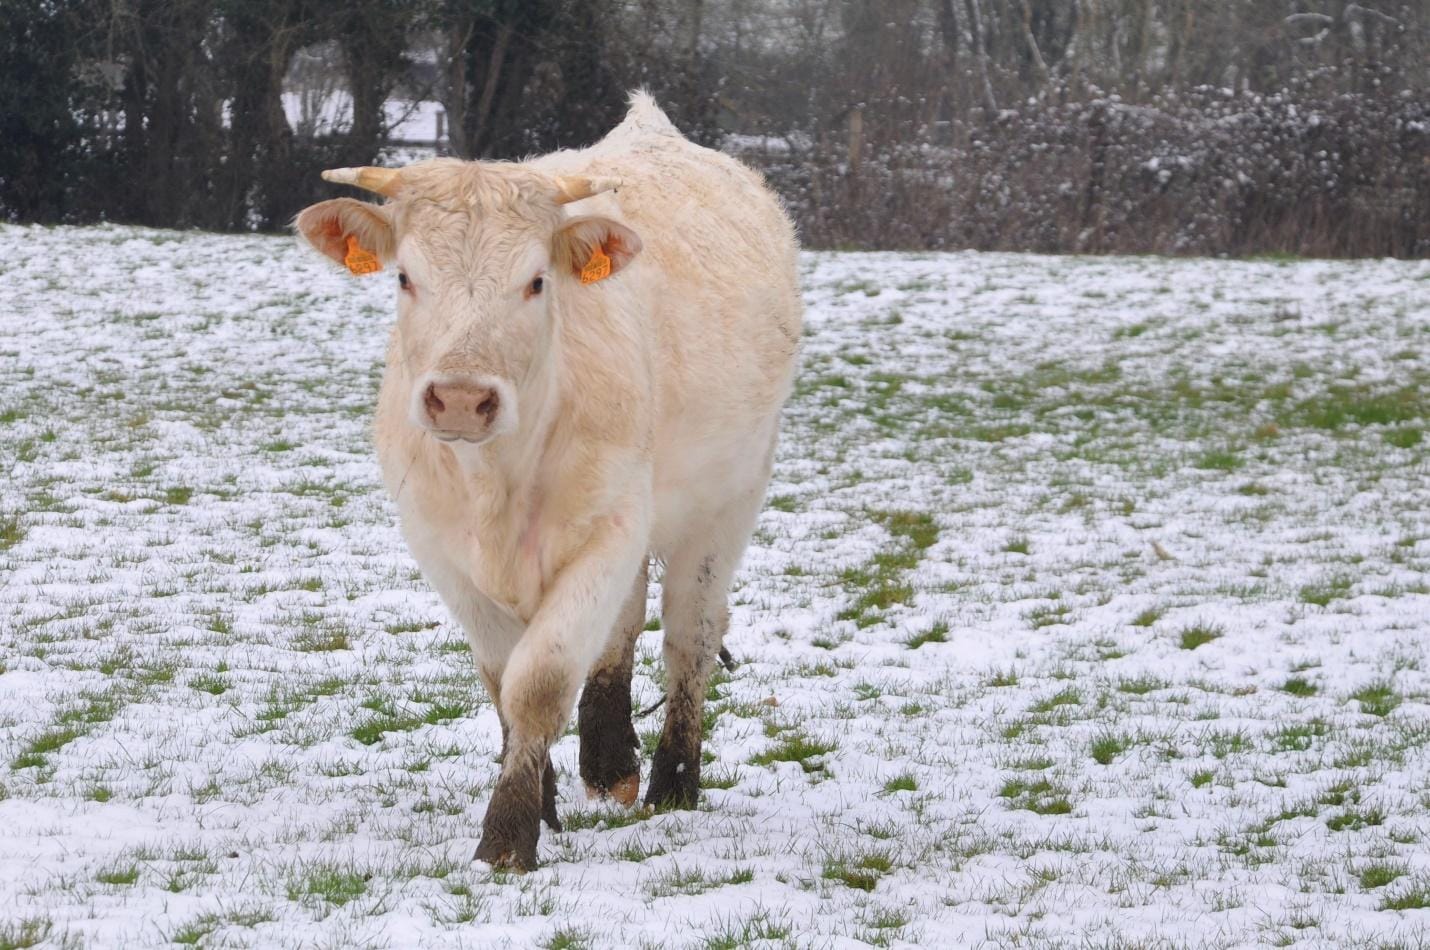 A cow’s metabolism slows down during winter as they tap into their body fat.